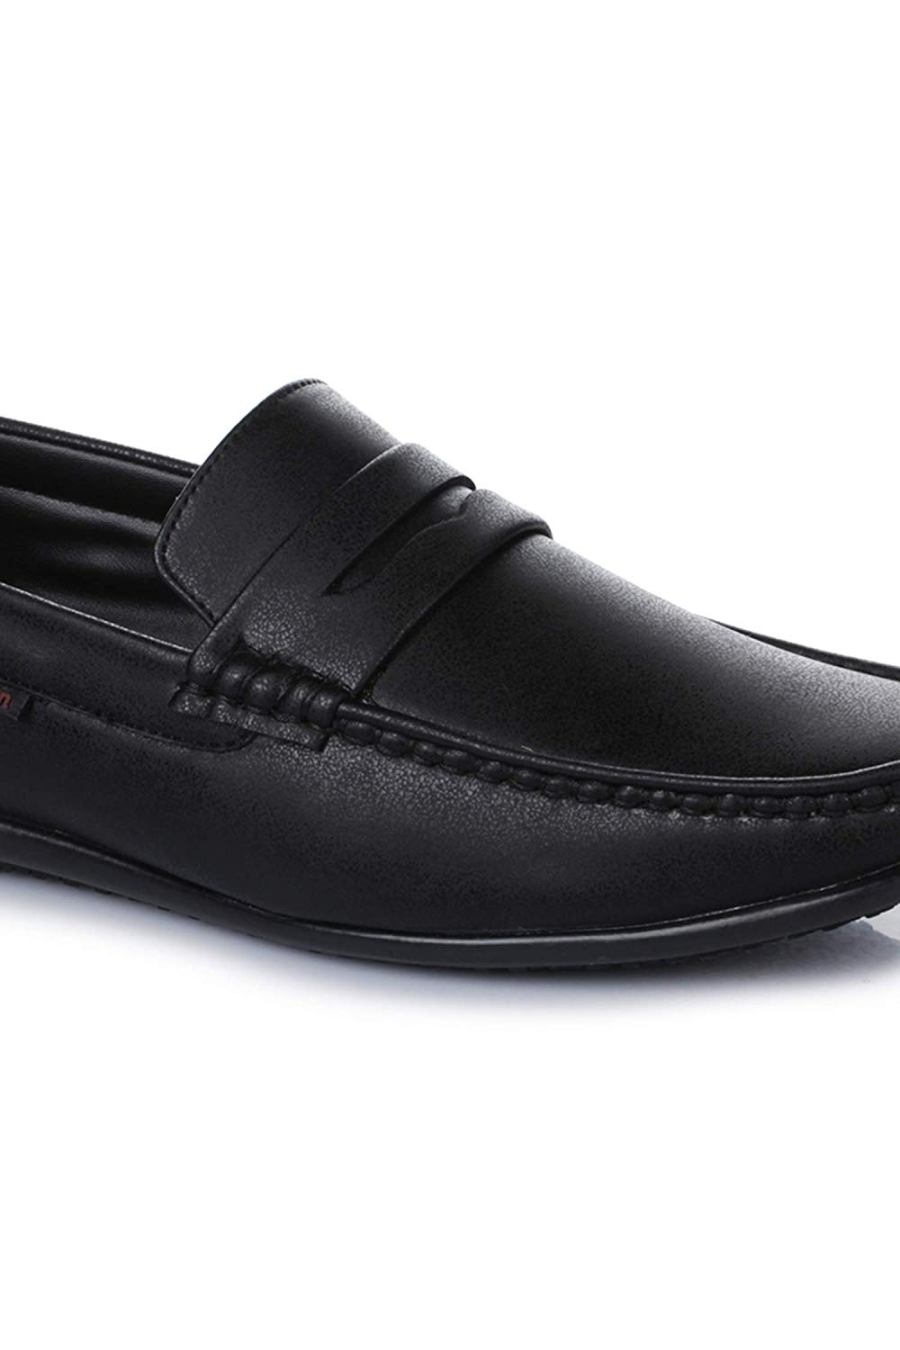 Buy Maxaero Men's Black Loafer Shoes Online @ ₹649 from ShopClues